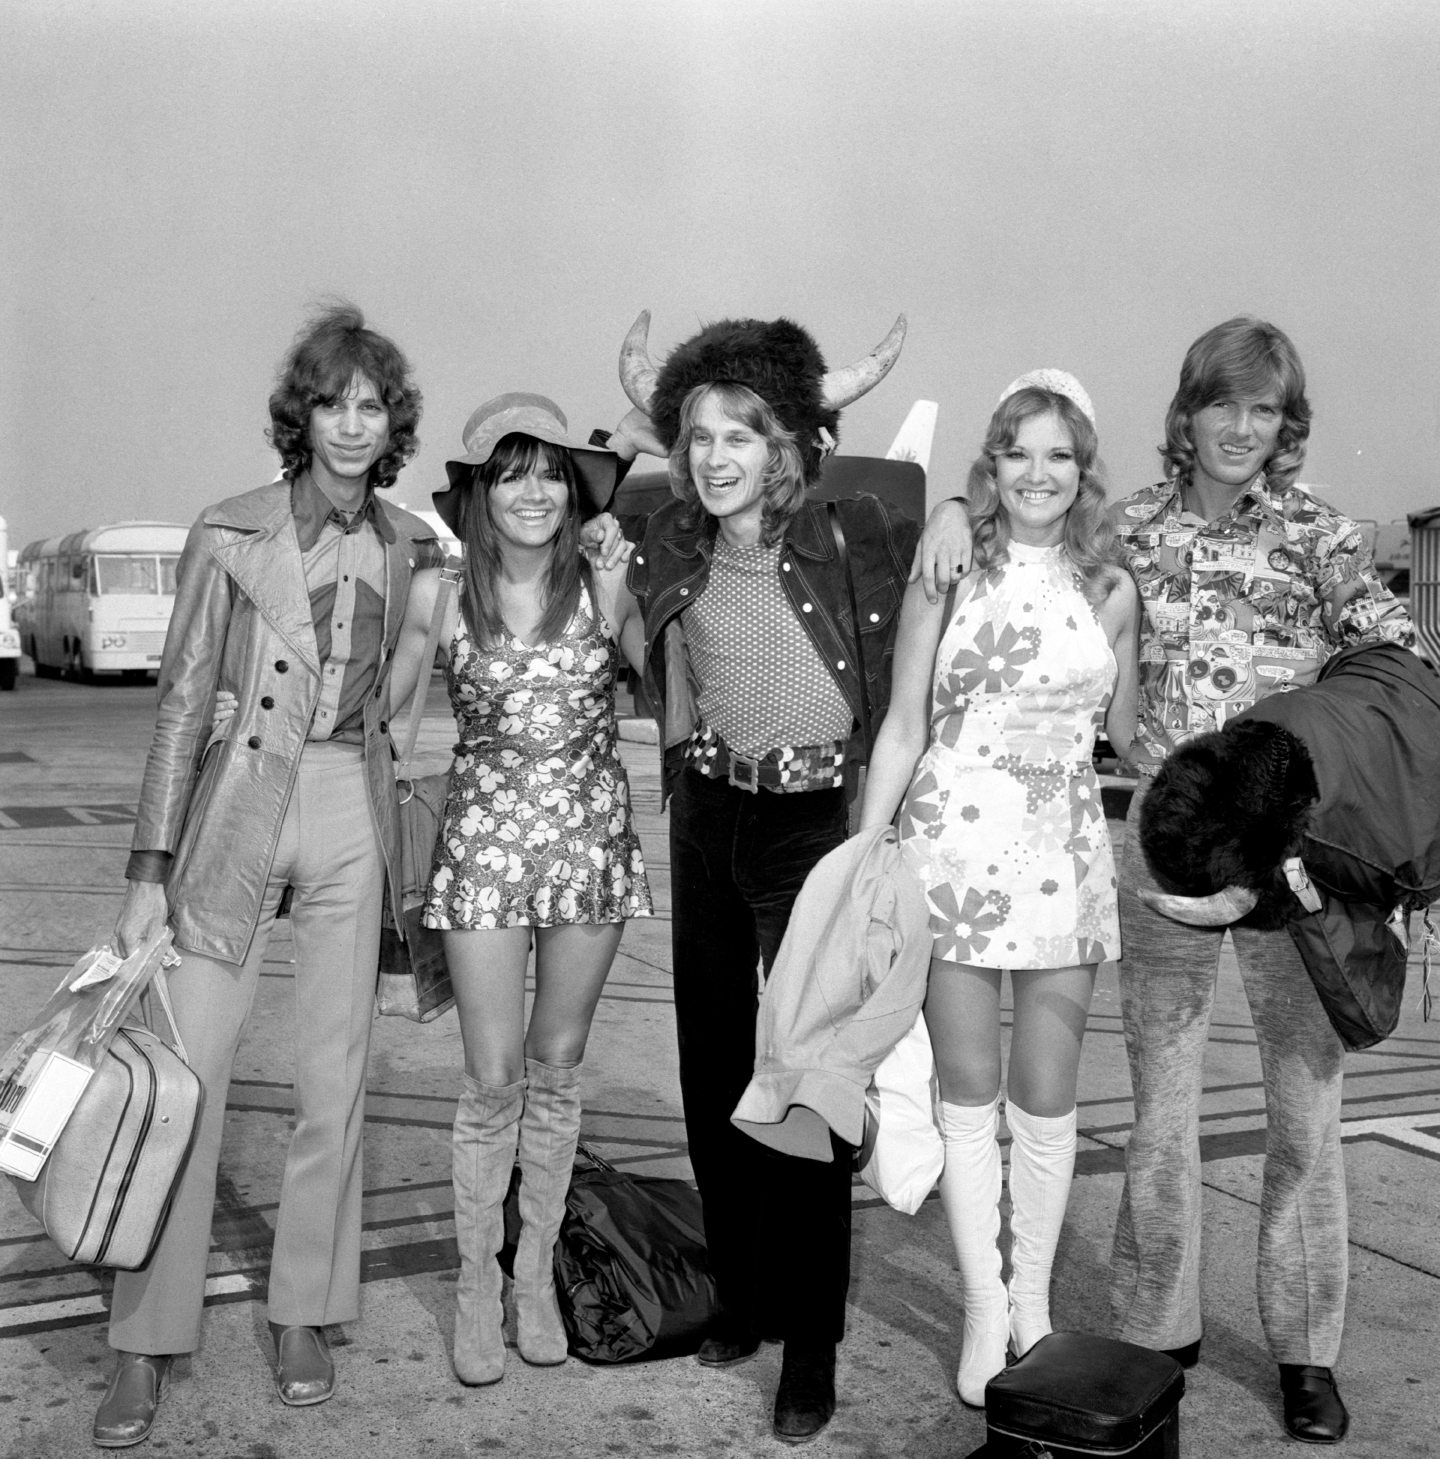 The New Seekers arrive at Heathrow Airport following a month-long tour of the US and Canada.